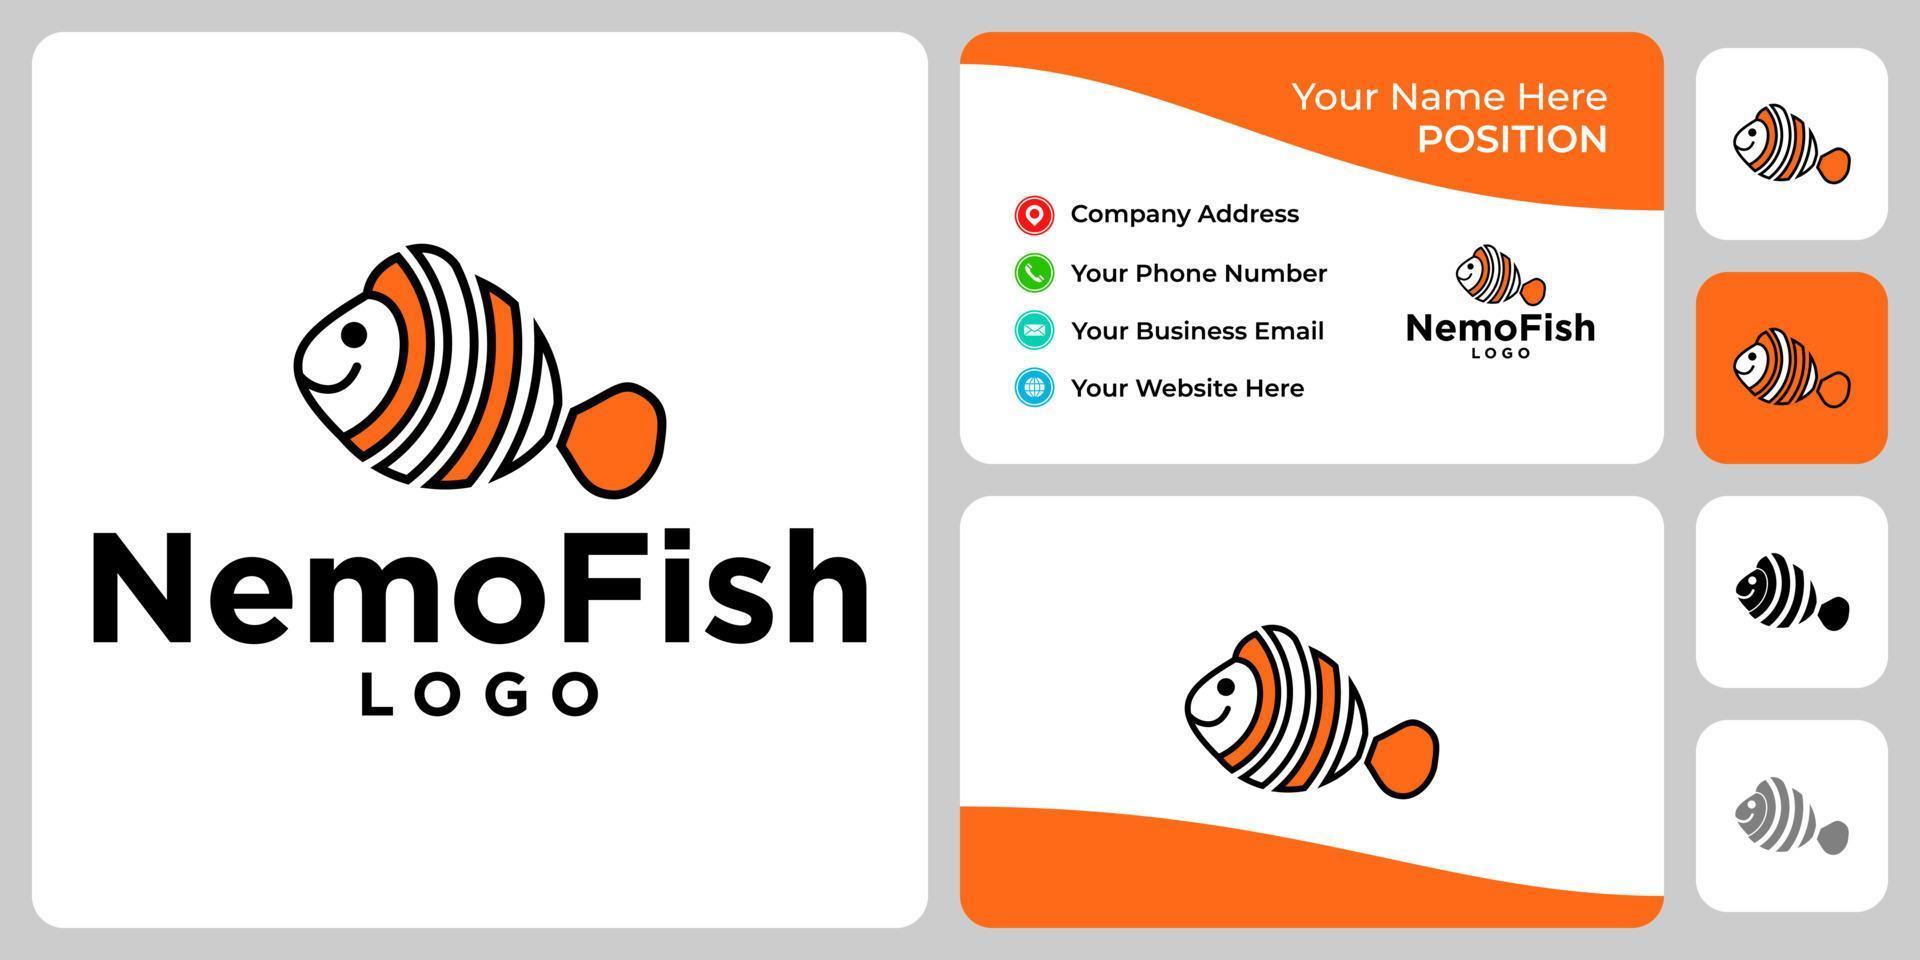 Nemo fish logo design with business card template. vector